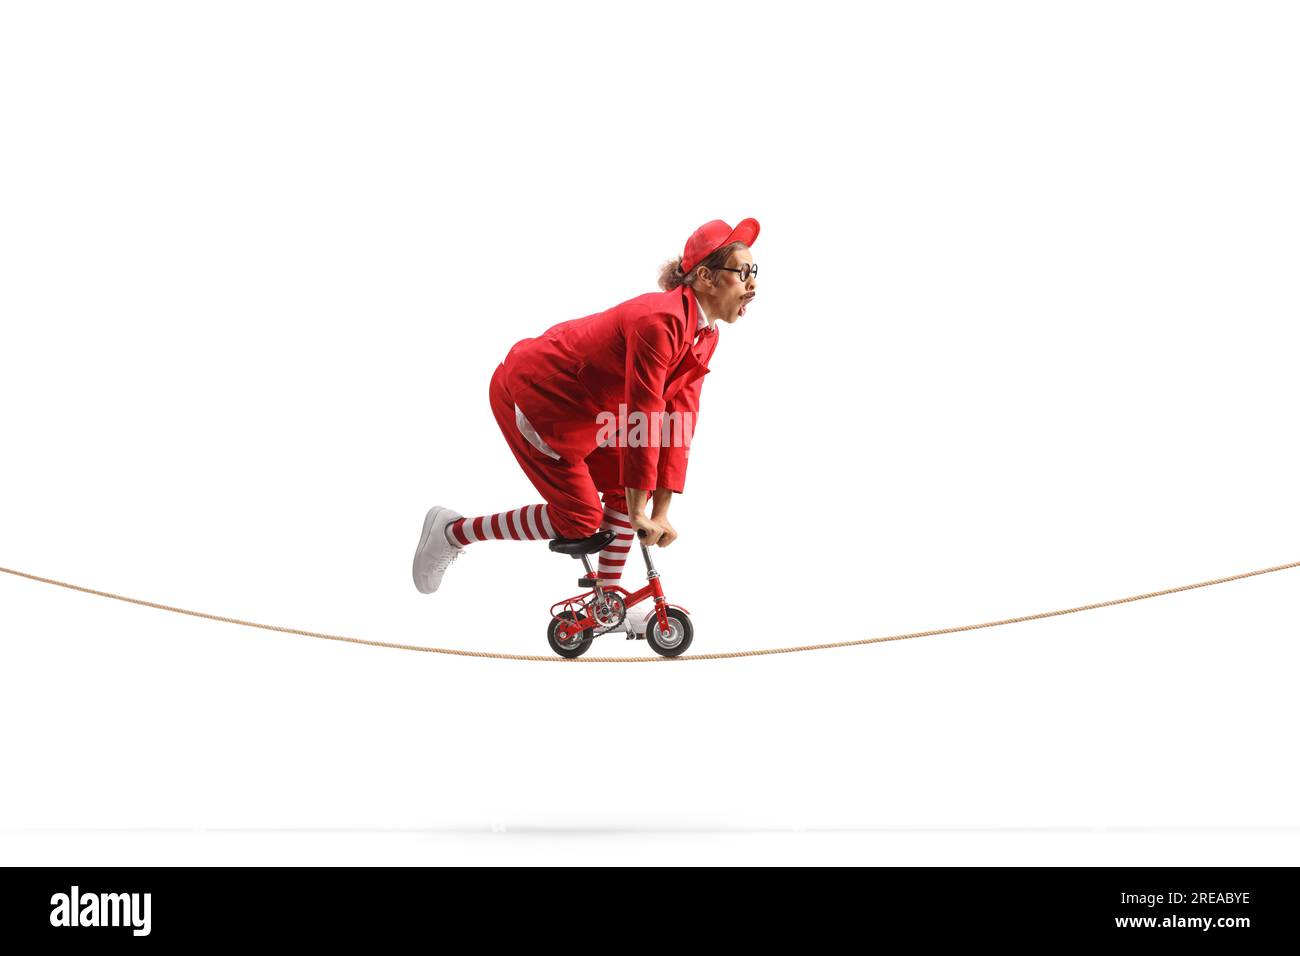 Entertainer in a red suit riding a small bike over a tightrope isolated on white background Stock Photo